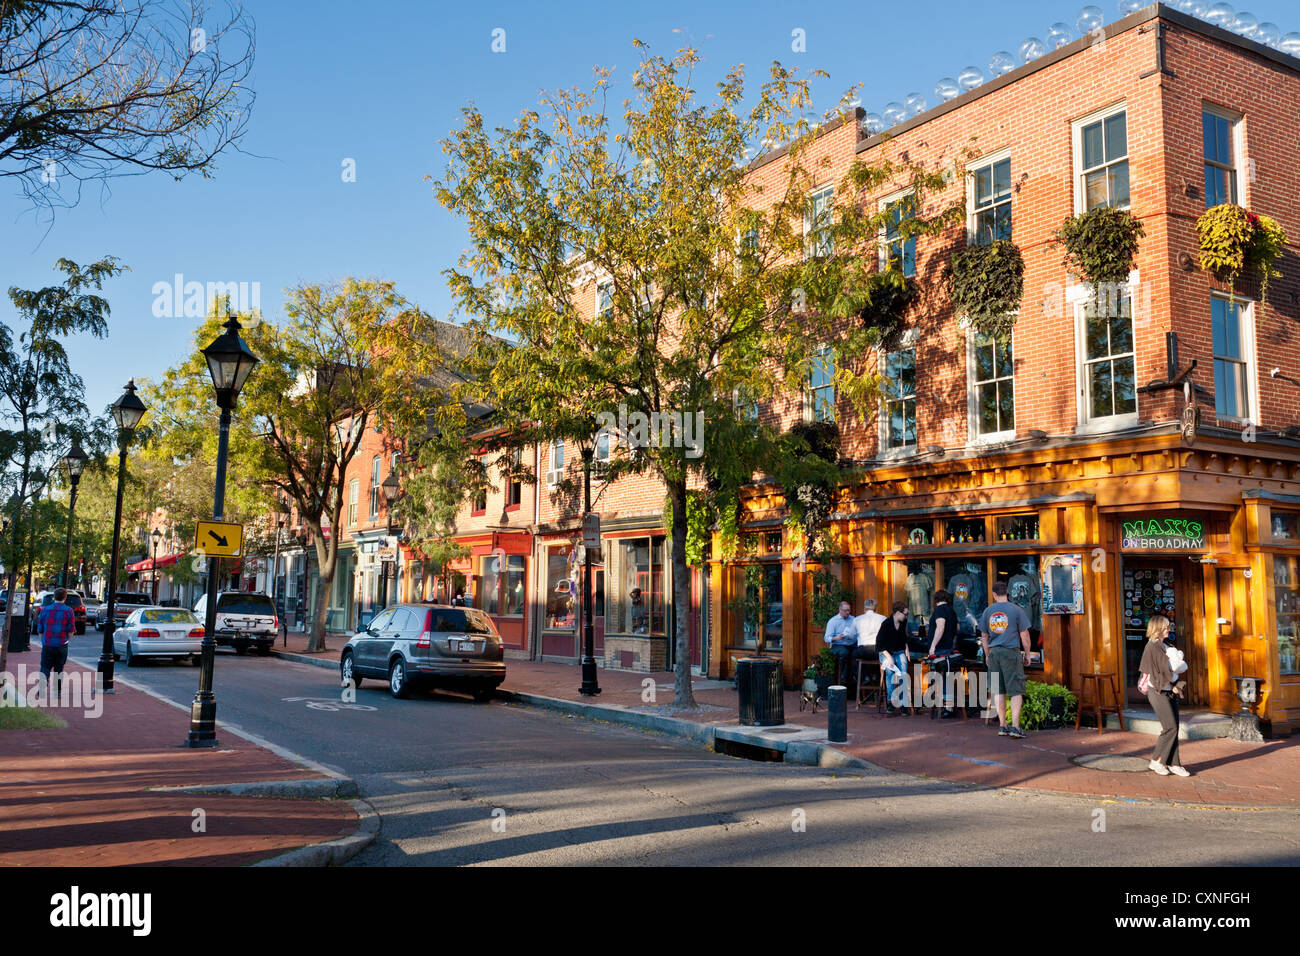 A pleasant day in Fells Point, Baltimore, Maryland, finds friends drinking alfresco. Stock Photo